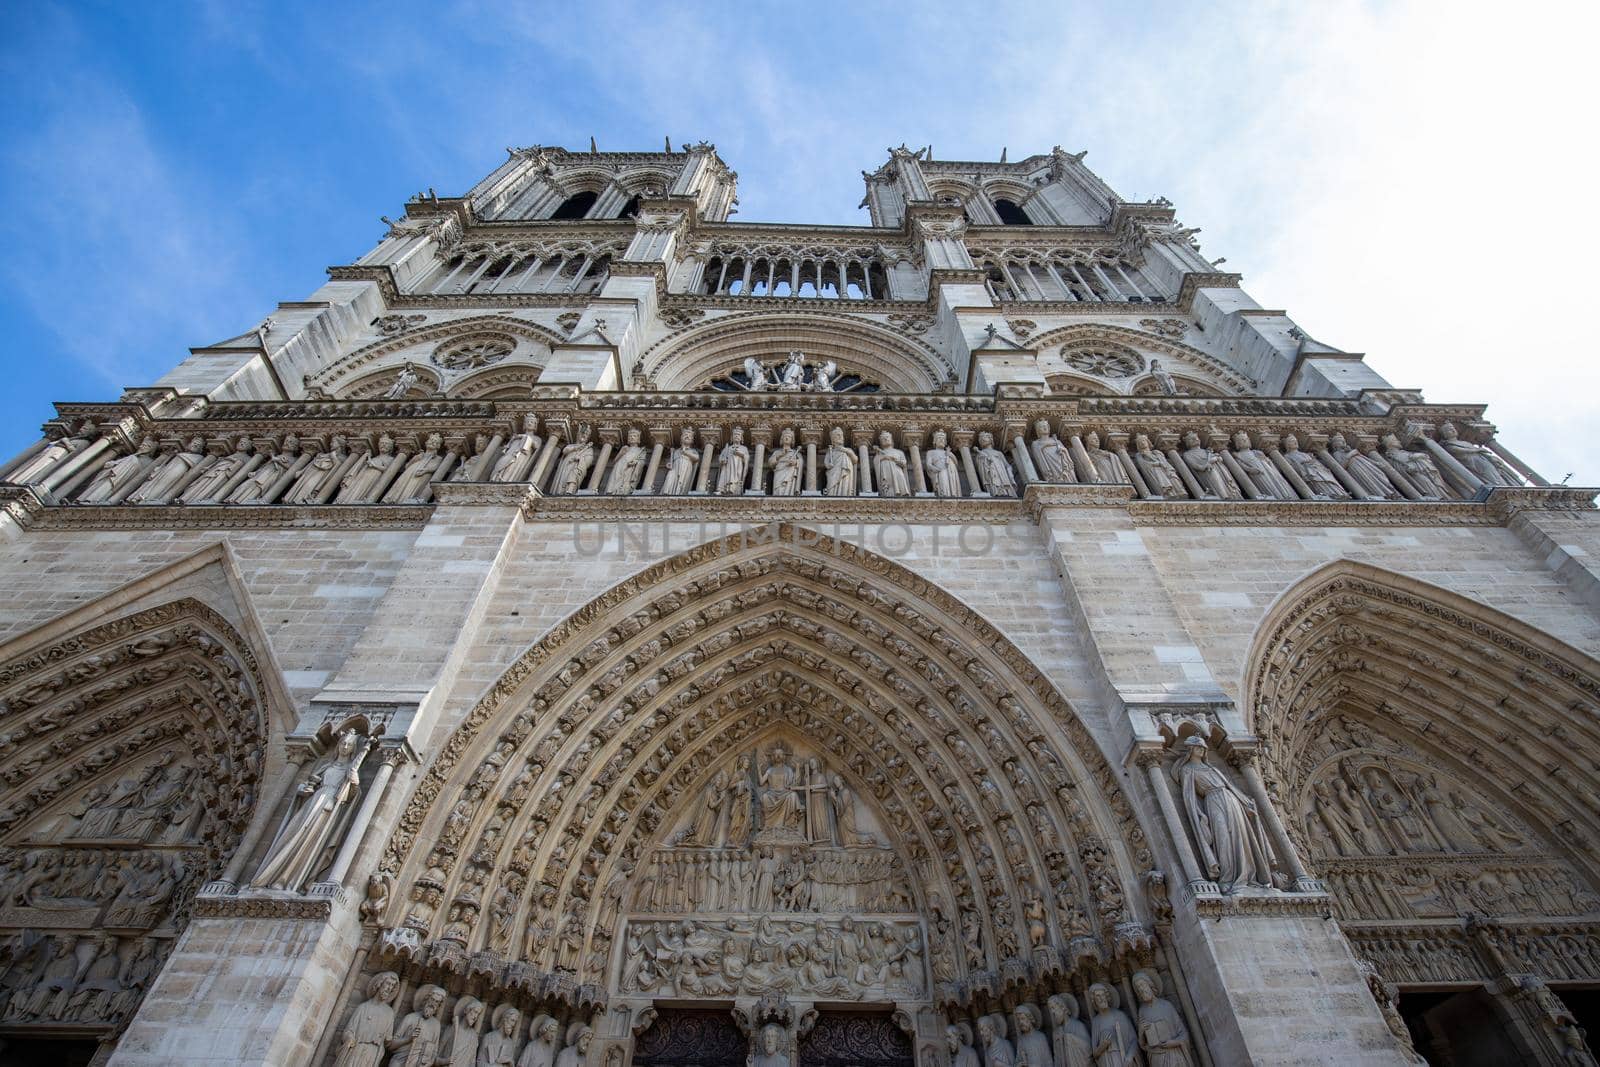 The front with two main towers of cathedral Notre Dame, Paris by reinerc